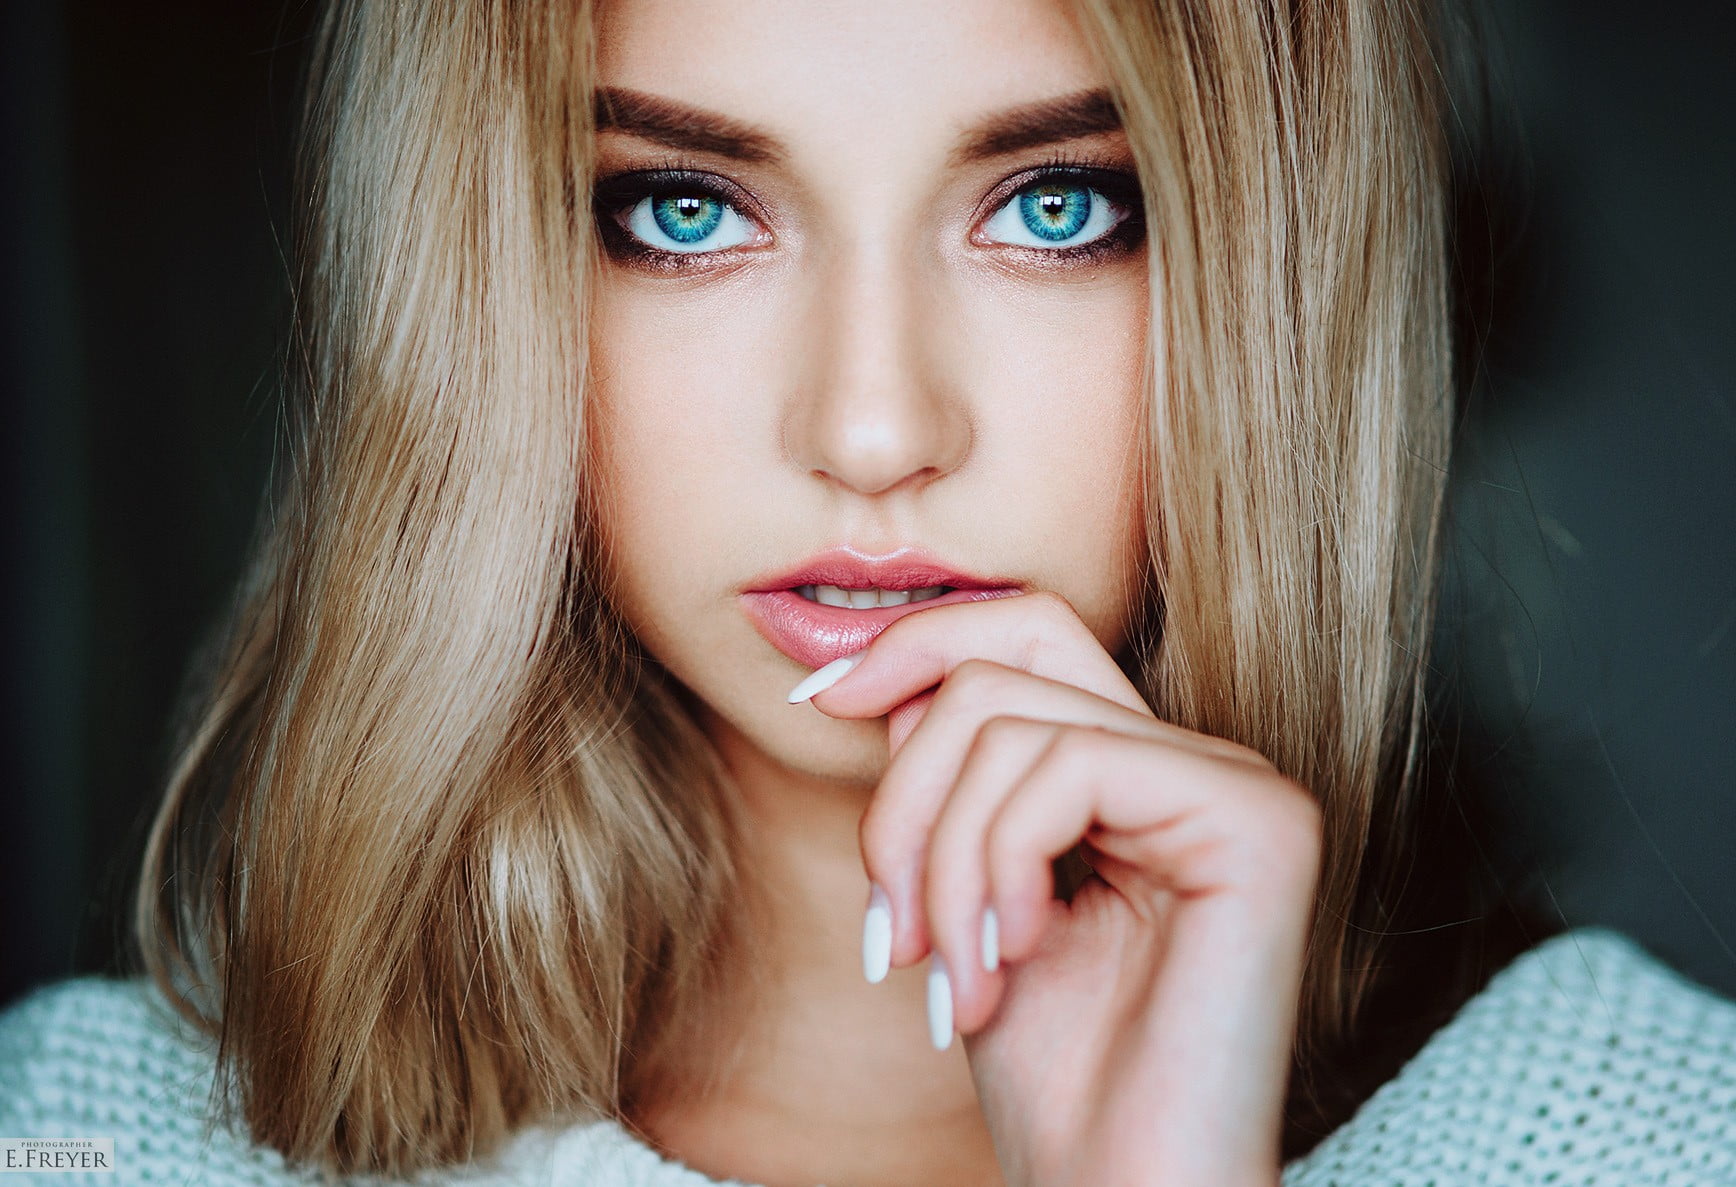 4. Pretty blonde girls with blonde hair and blue eyes - wide 2